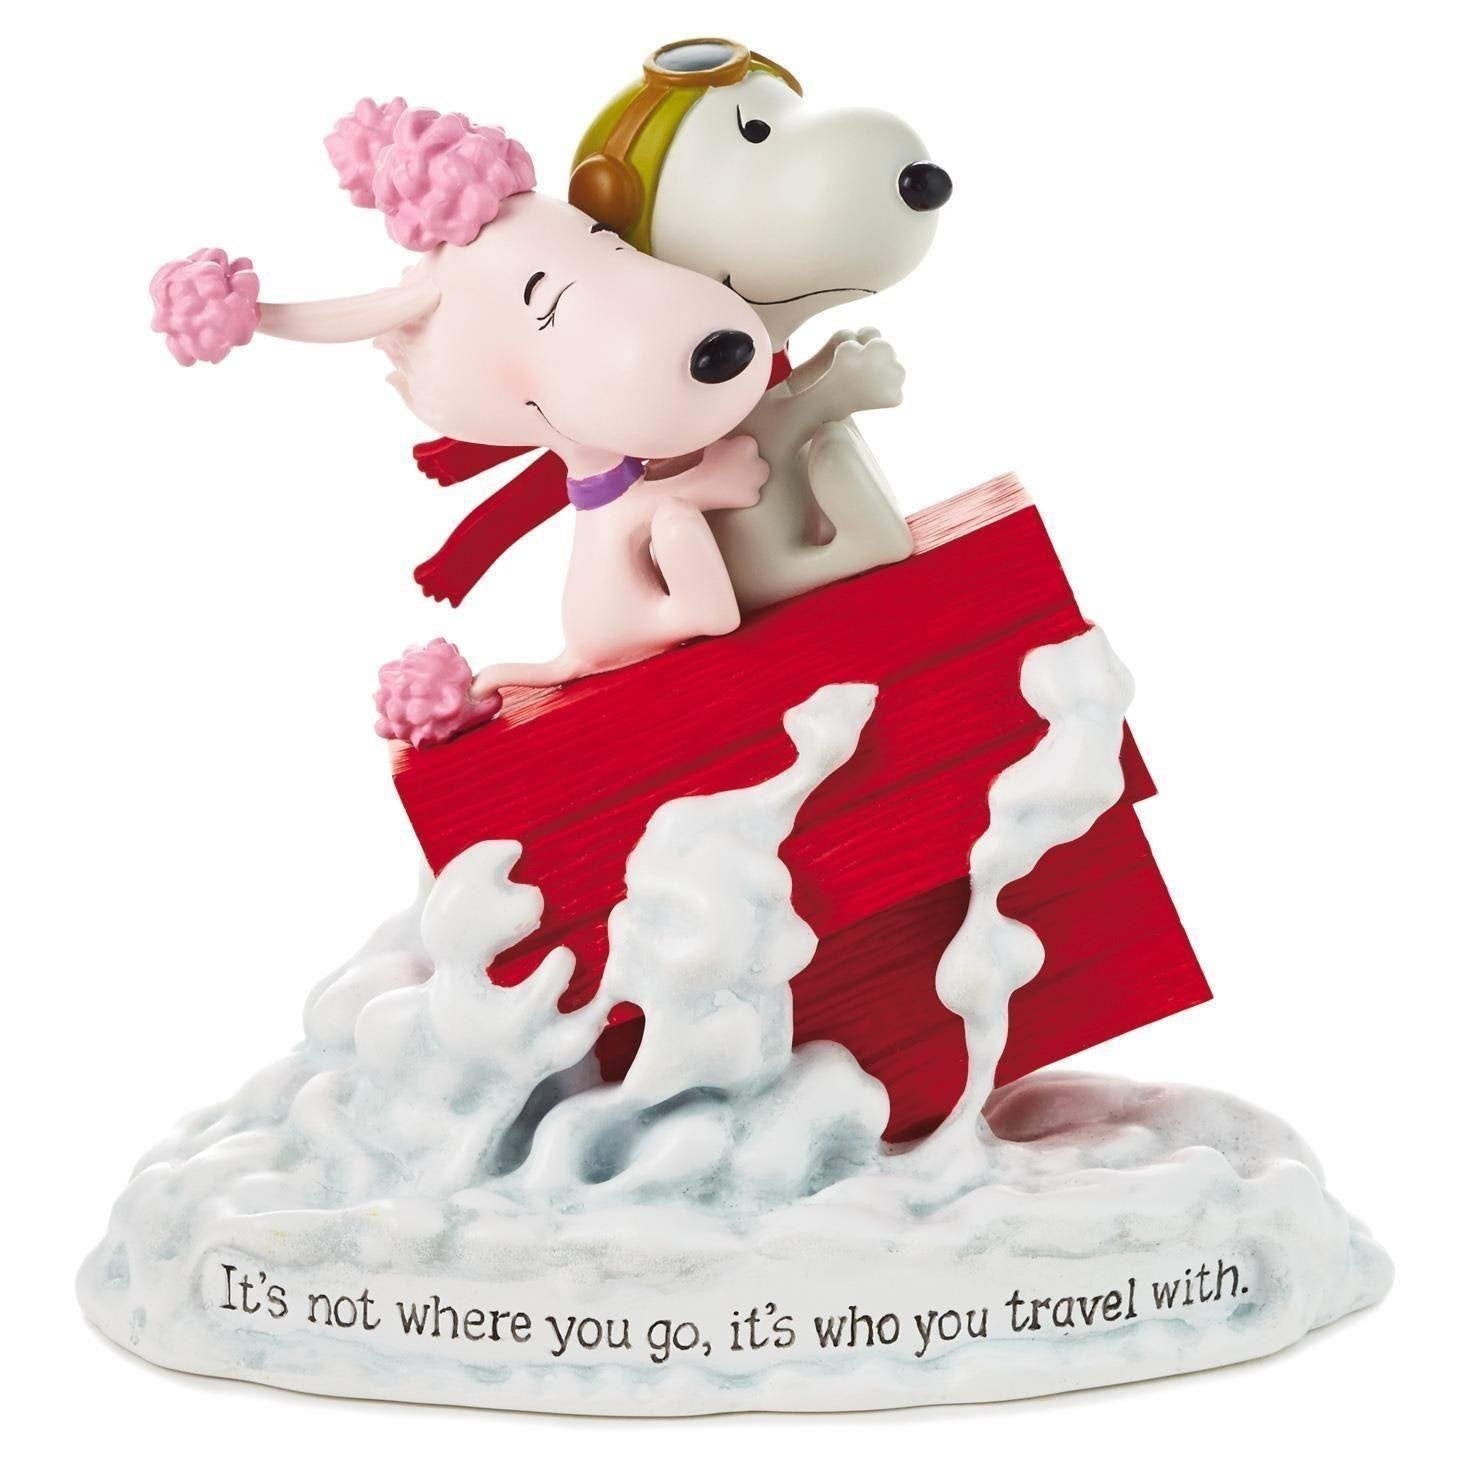 The Peanuts Movie Snoopy Flying Ace & Fifi Figurine